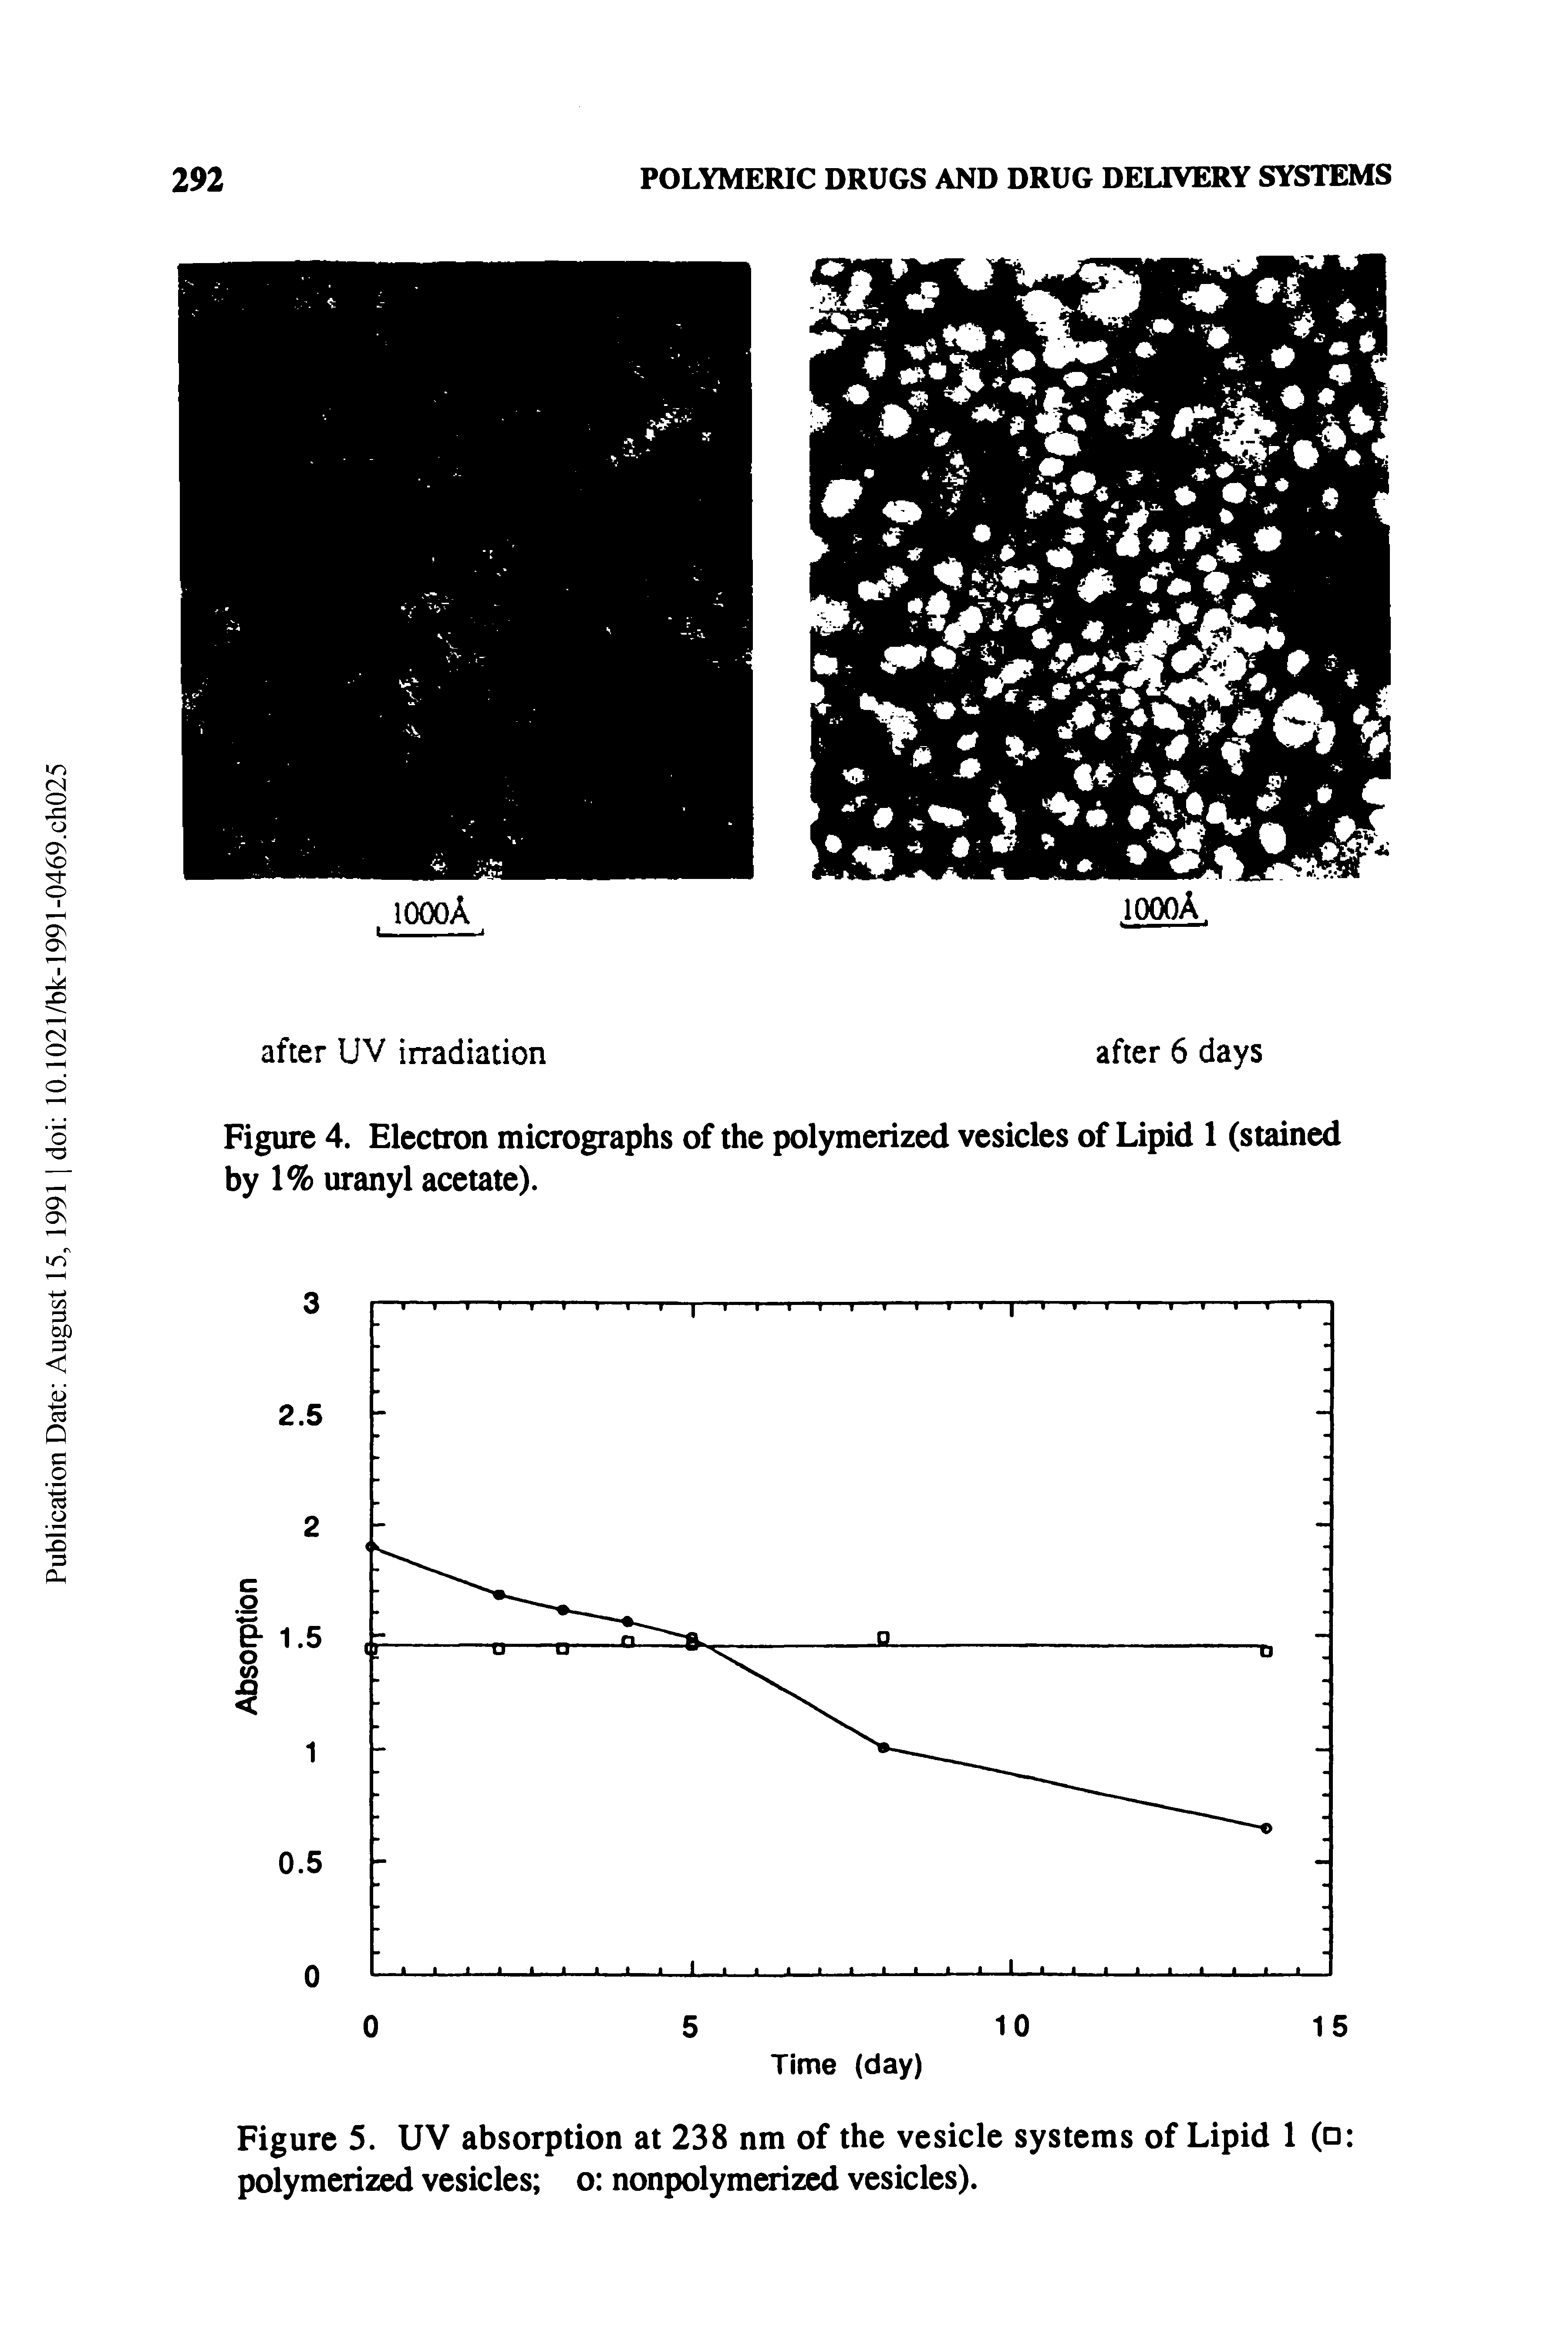 Figure 5. UV absorption at 238 nm of the vesicle systems of Lipid 1 ( polymerized vesicles o nonpolymerized vesicles).